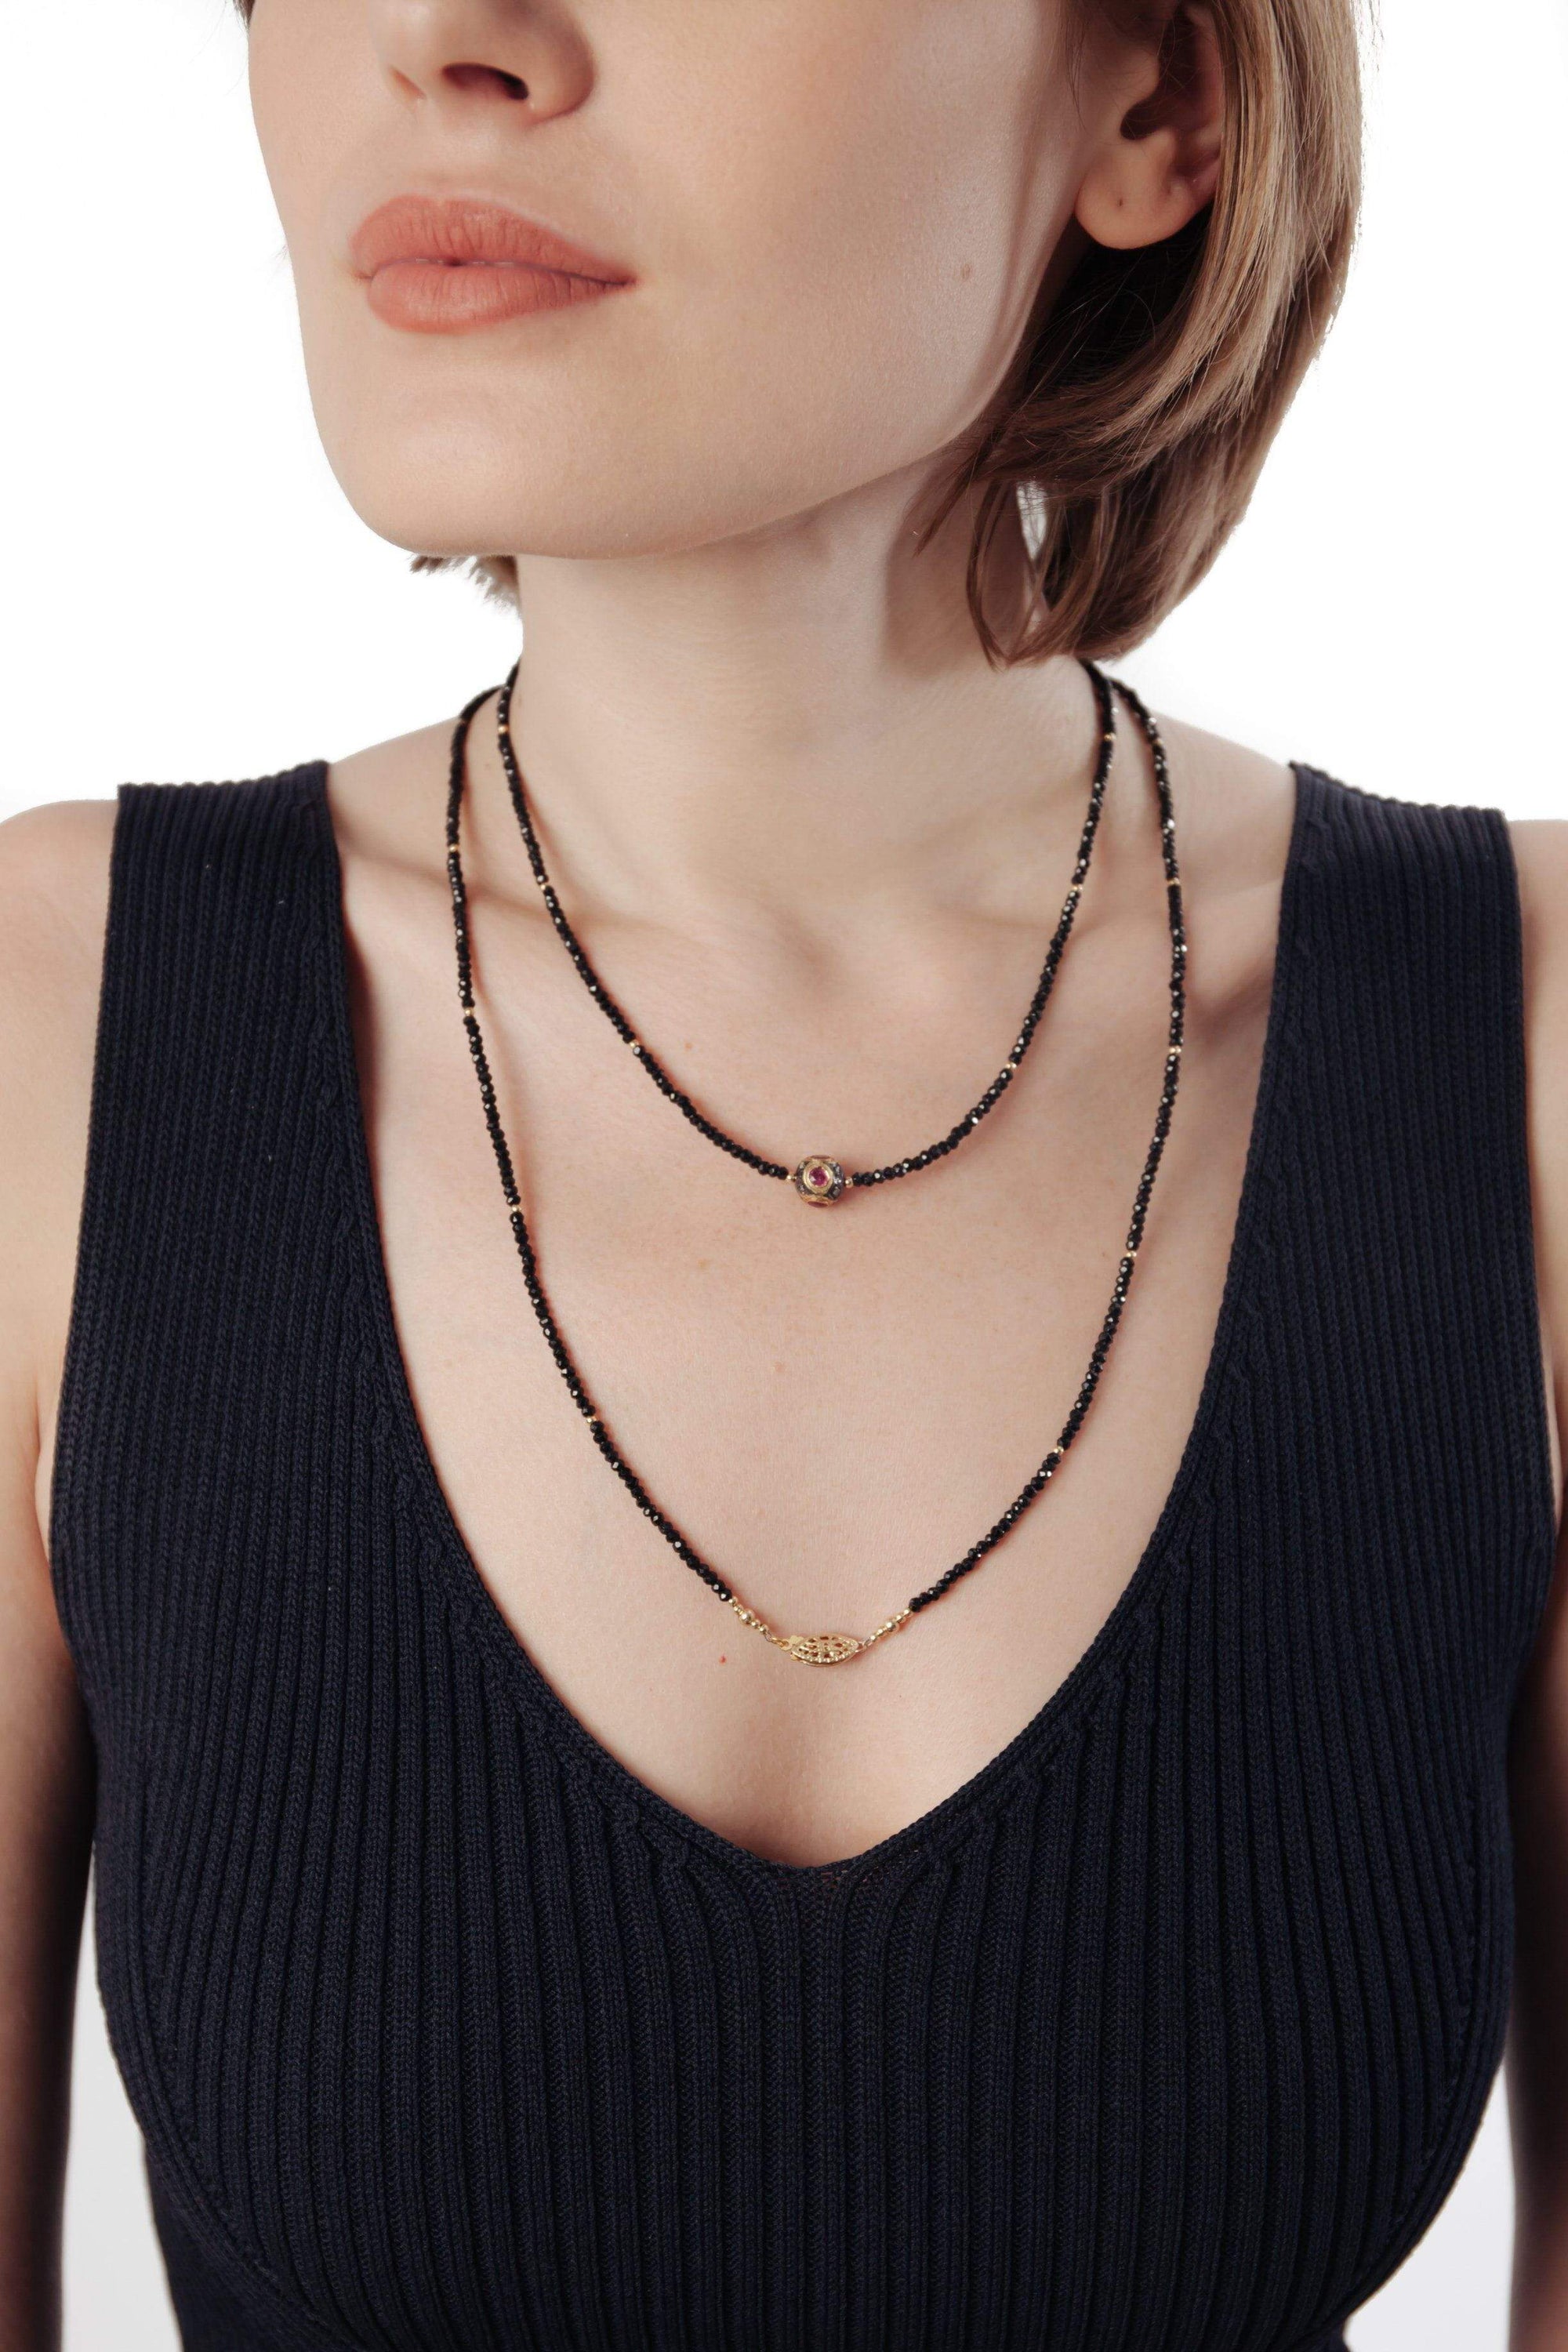 Amazon.com: Shop LC Black Spinel Necklace - Black Beaded Layered Necklace  for Women - Multi Strand Bead Necklaces - 18